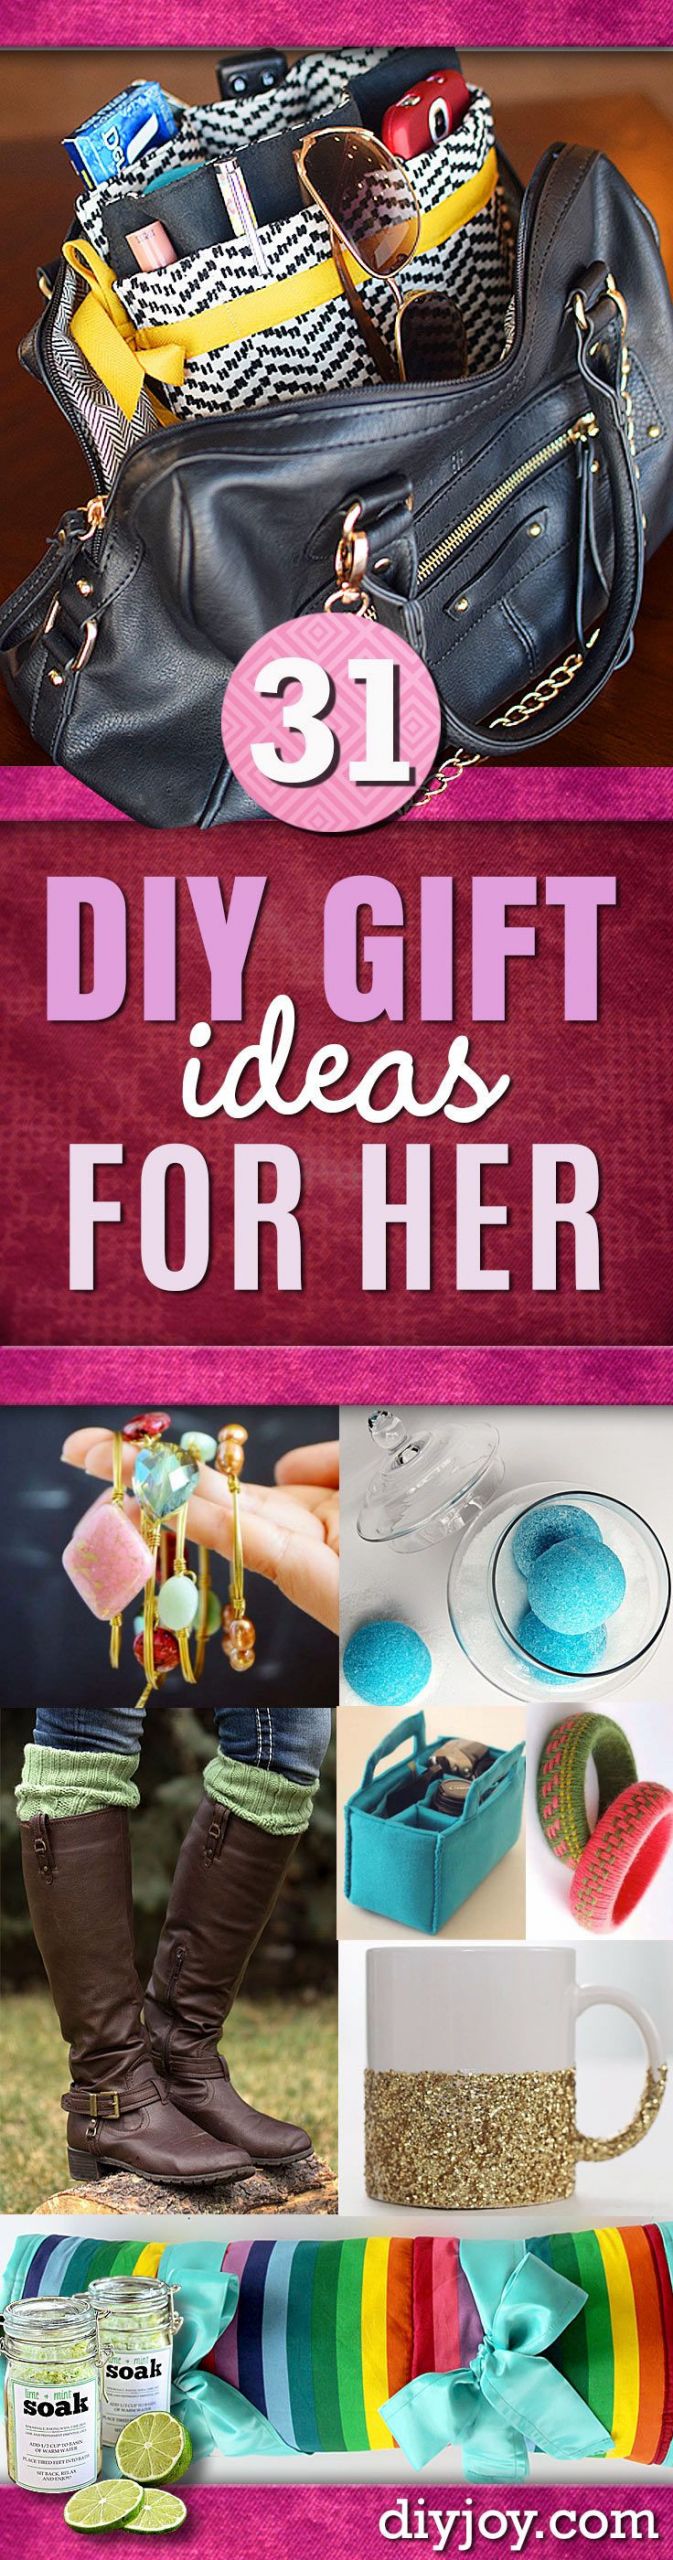 Cheap Birthday Gifts For Her
 DIY Gift Ideas for Her